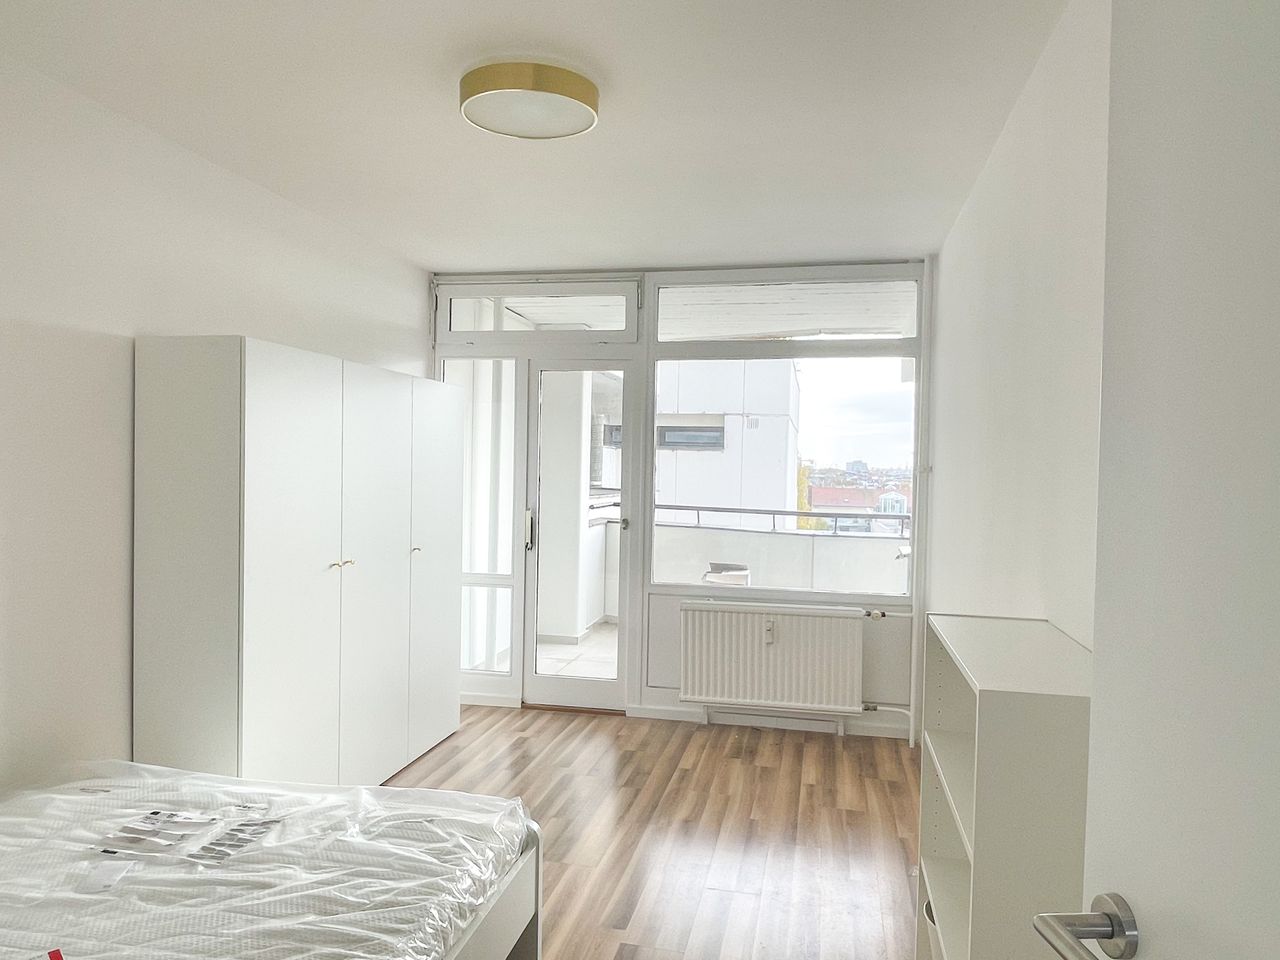 Newly renovated apartment with nice views in Charlottenburg